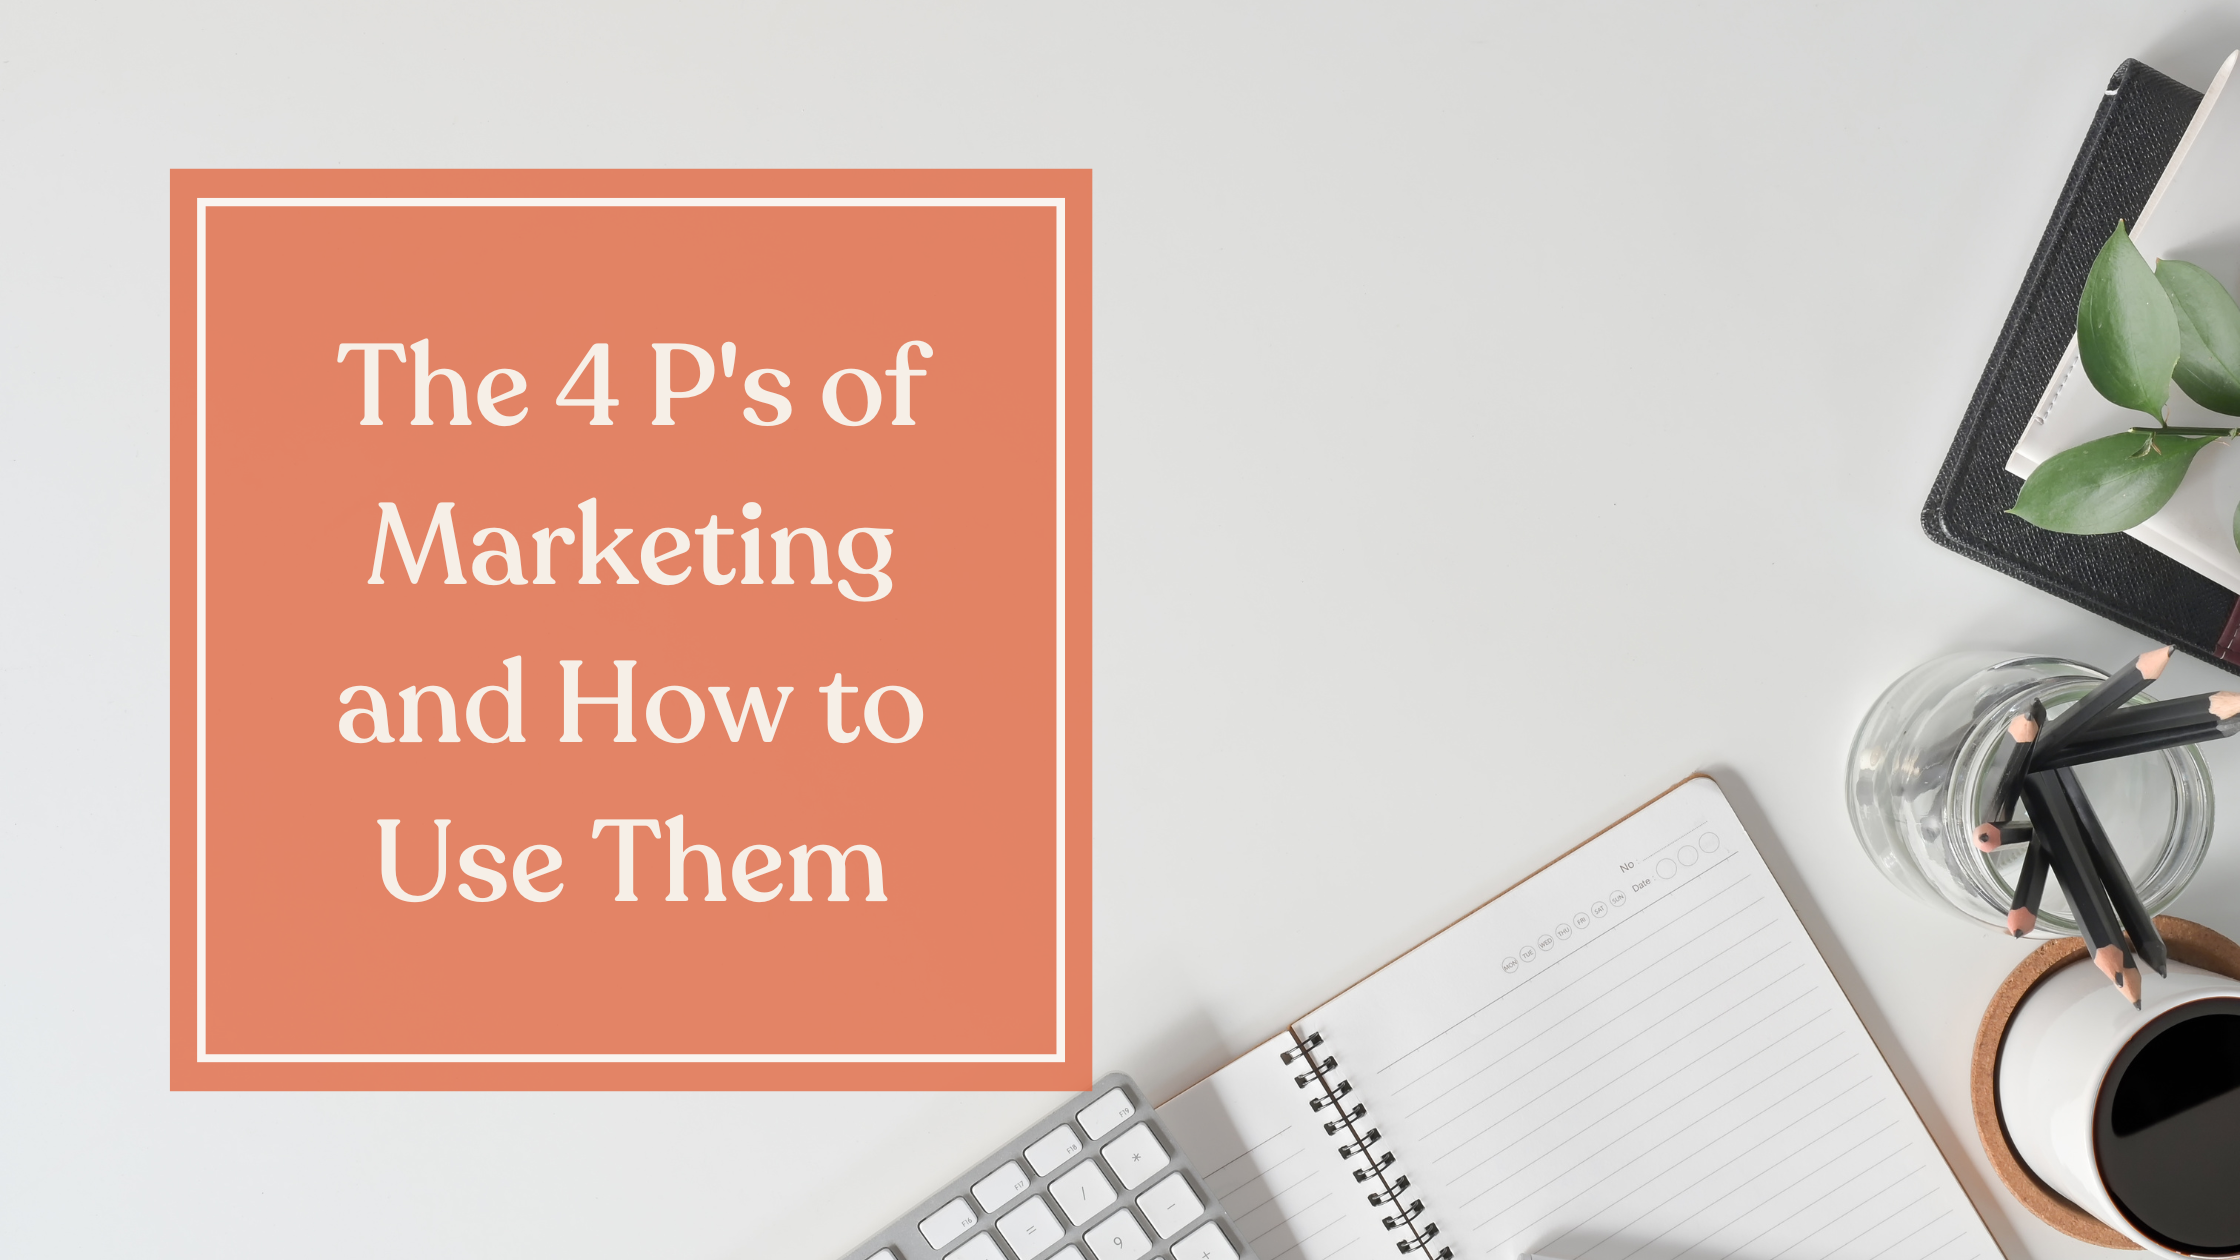 The 4 P's of Marketing and How to Use Them